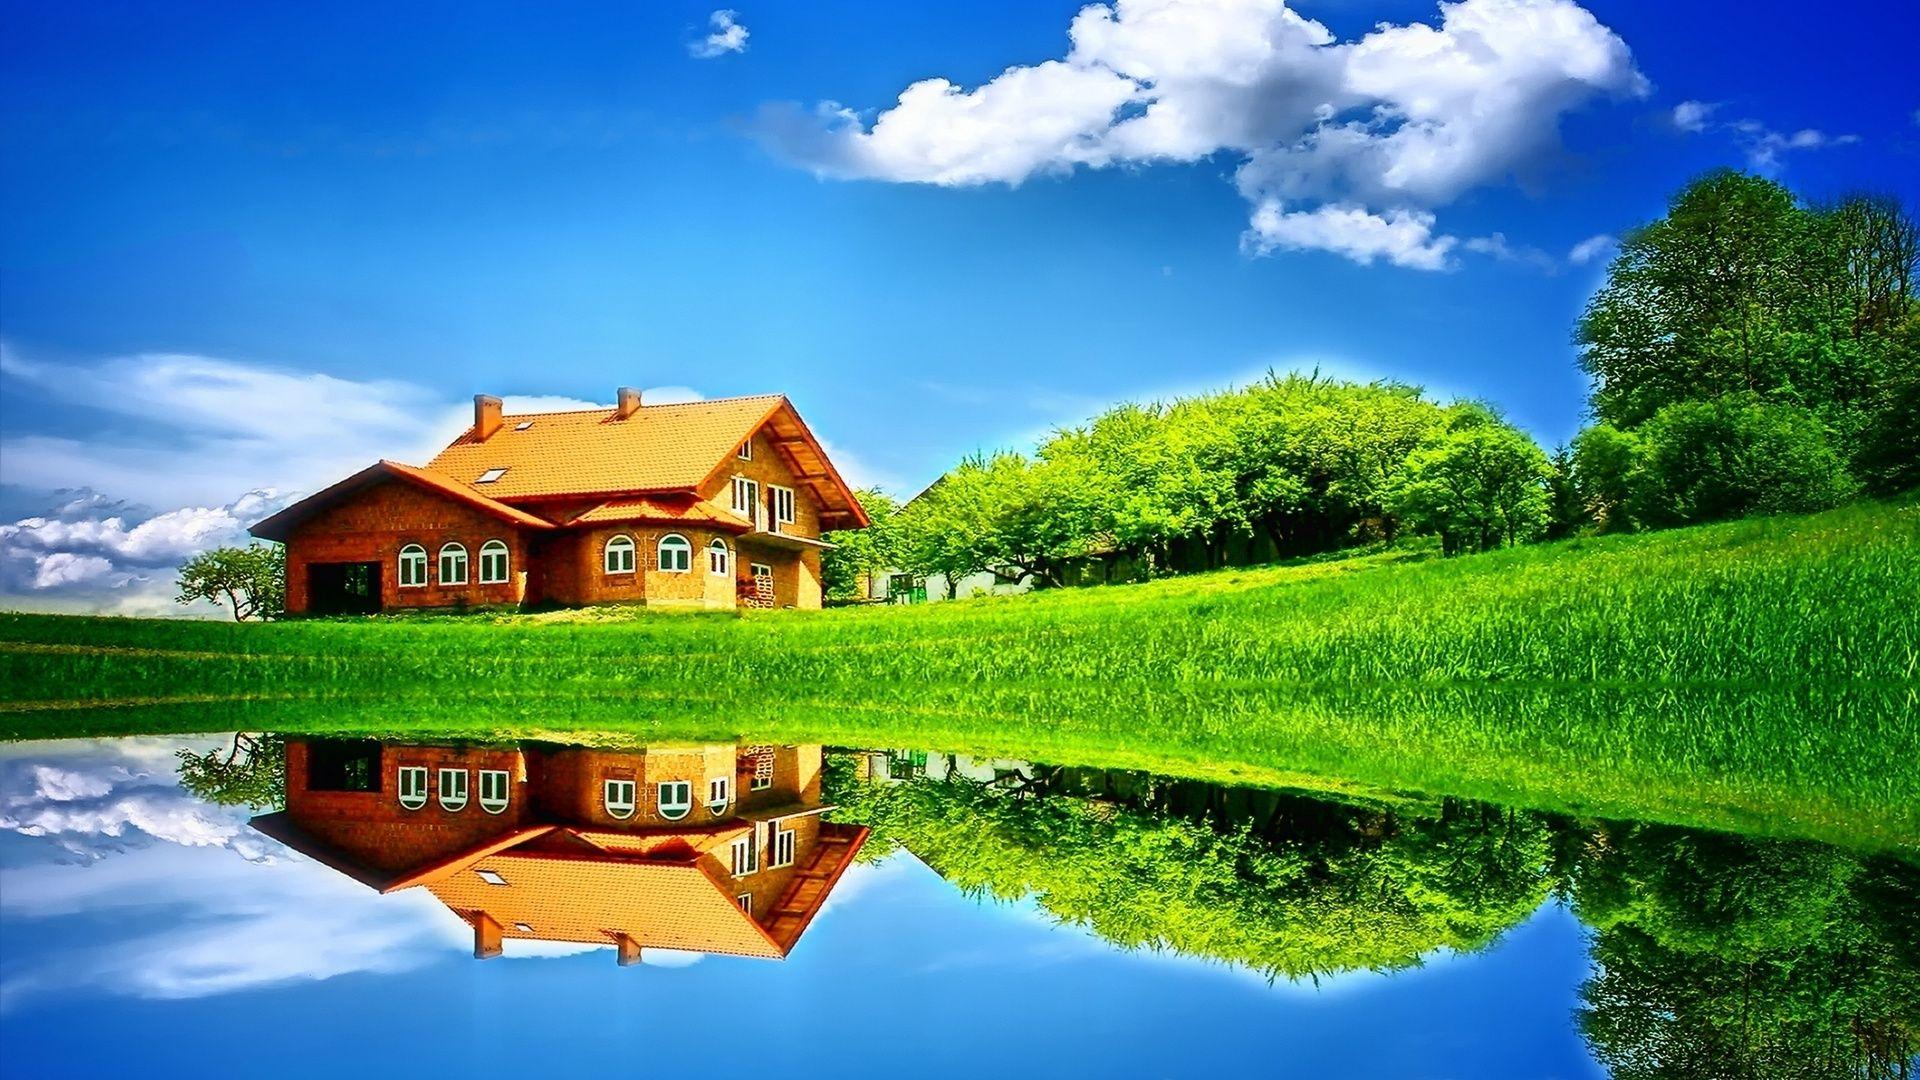 House reflected in the lake wallpaper. Beautiful nature wallpaper, Nature wallpaper, HD nature wallpaper